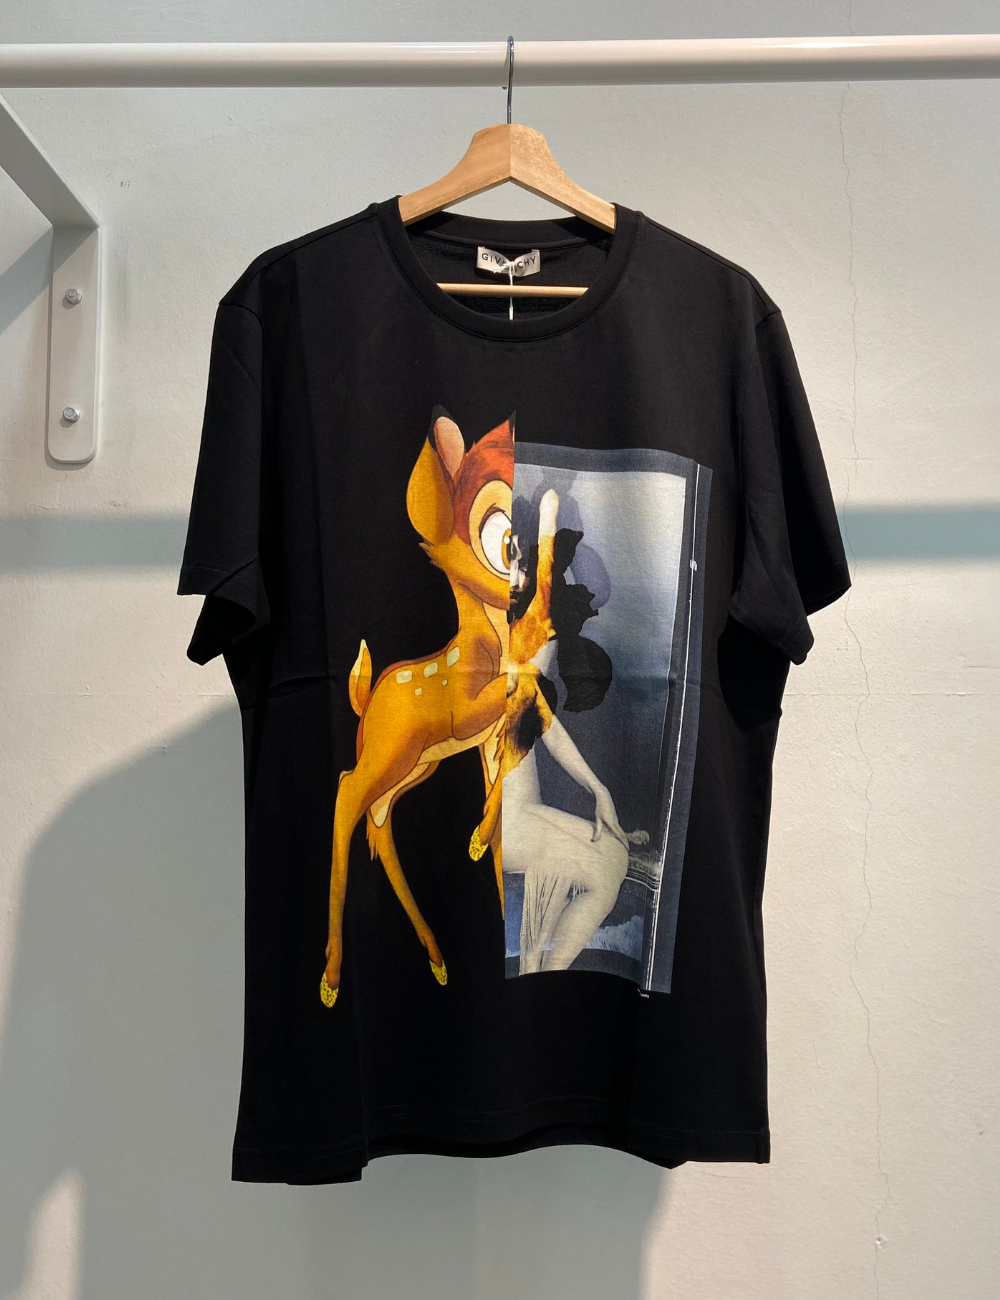 Givenchy Bambi Printed T-Shirt - Shop Streetwear, Sneakers, Slippers and Gifts online | Malaysia - The Factory KL